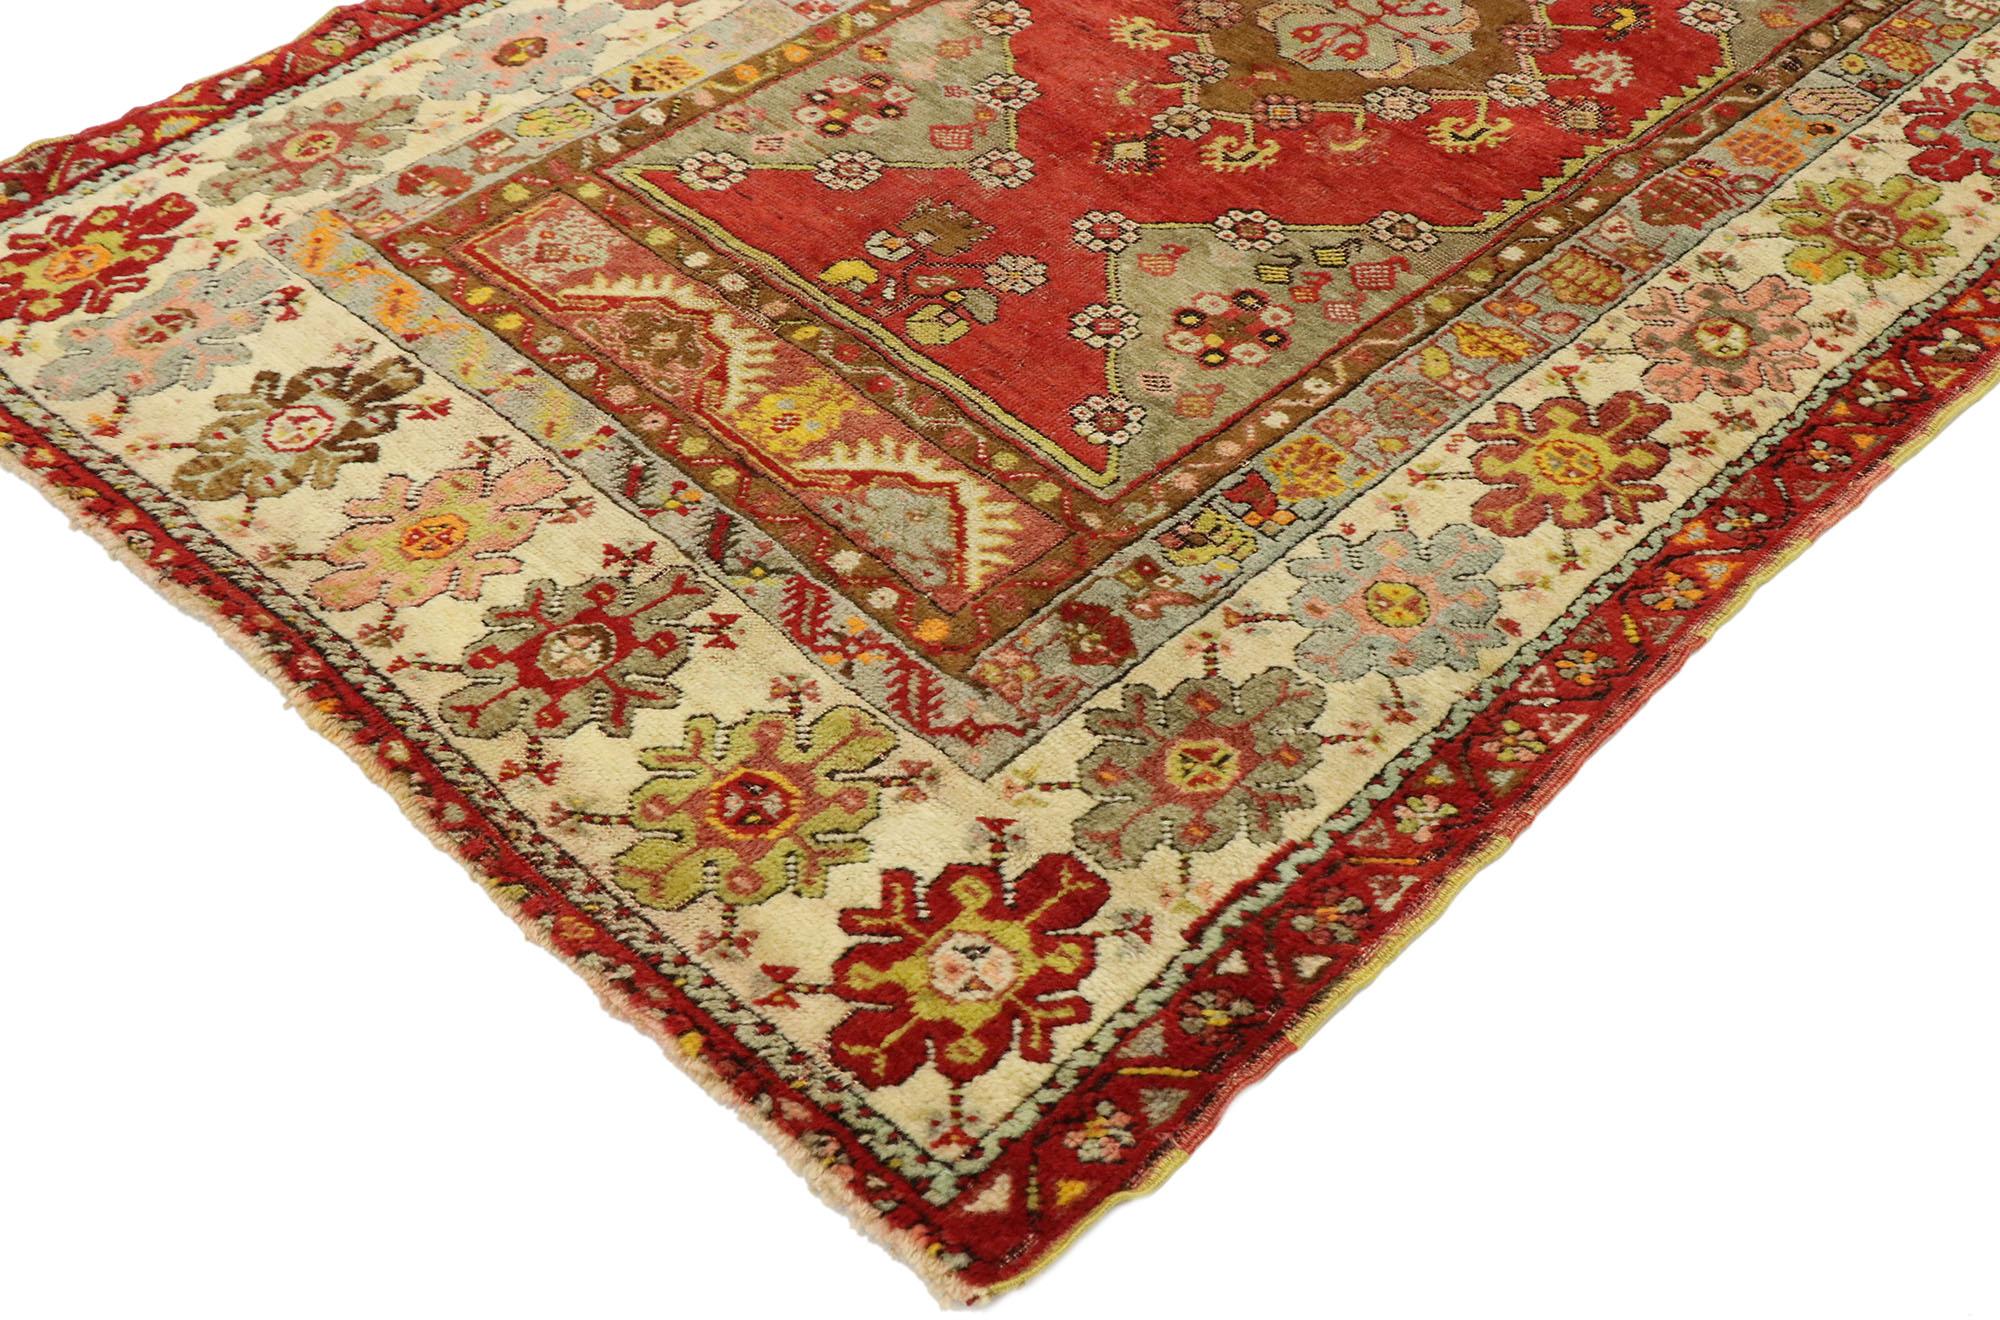 53058, vintage Turkish Oushak rug with Modern Rustic Tribal style. With vibrant colors and rustic sensibility, this hand knotted wool vintage Turkish Oushak rug is poised to impress. It features a traditional medallion design composed of a central